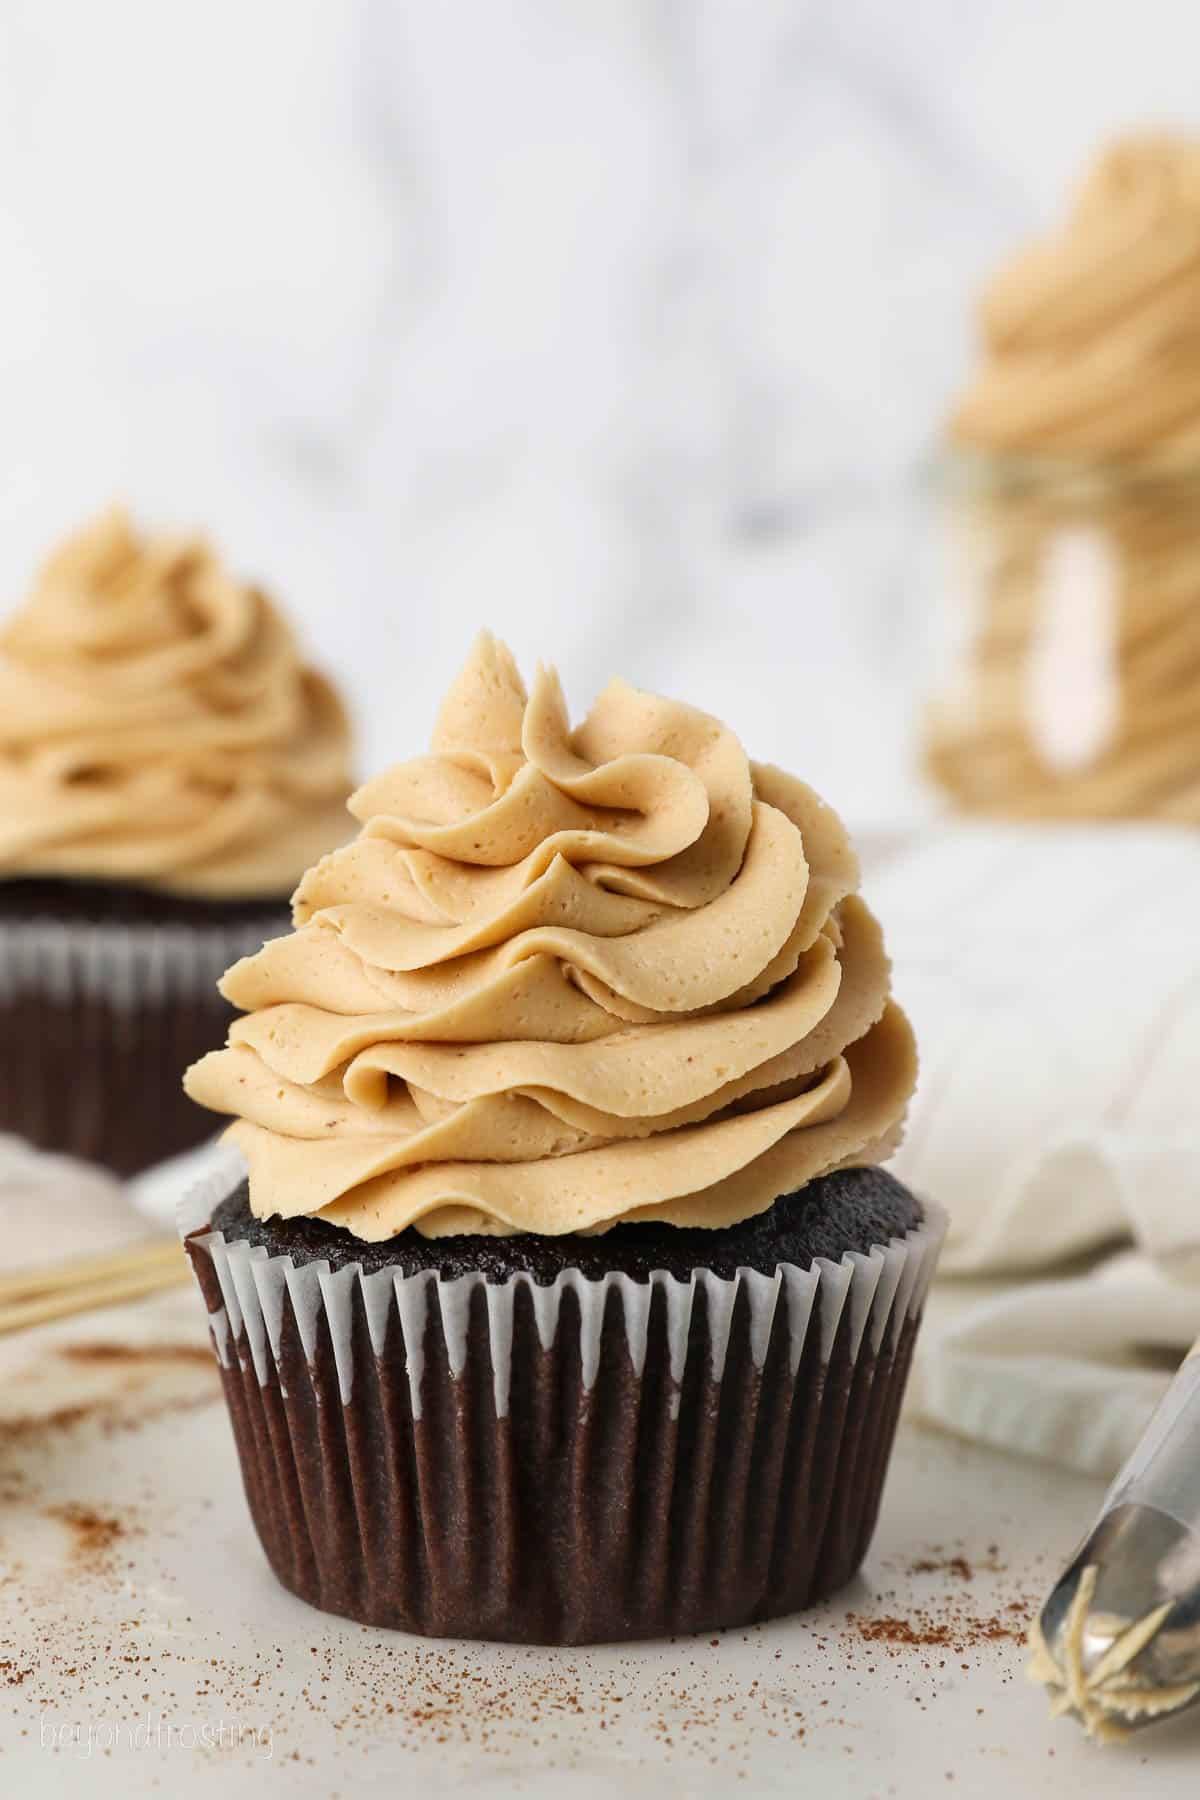 A chocolate cupcake topped with a piped swirl of coffee buttercream.